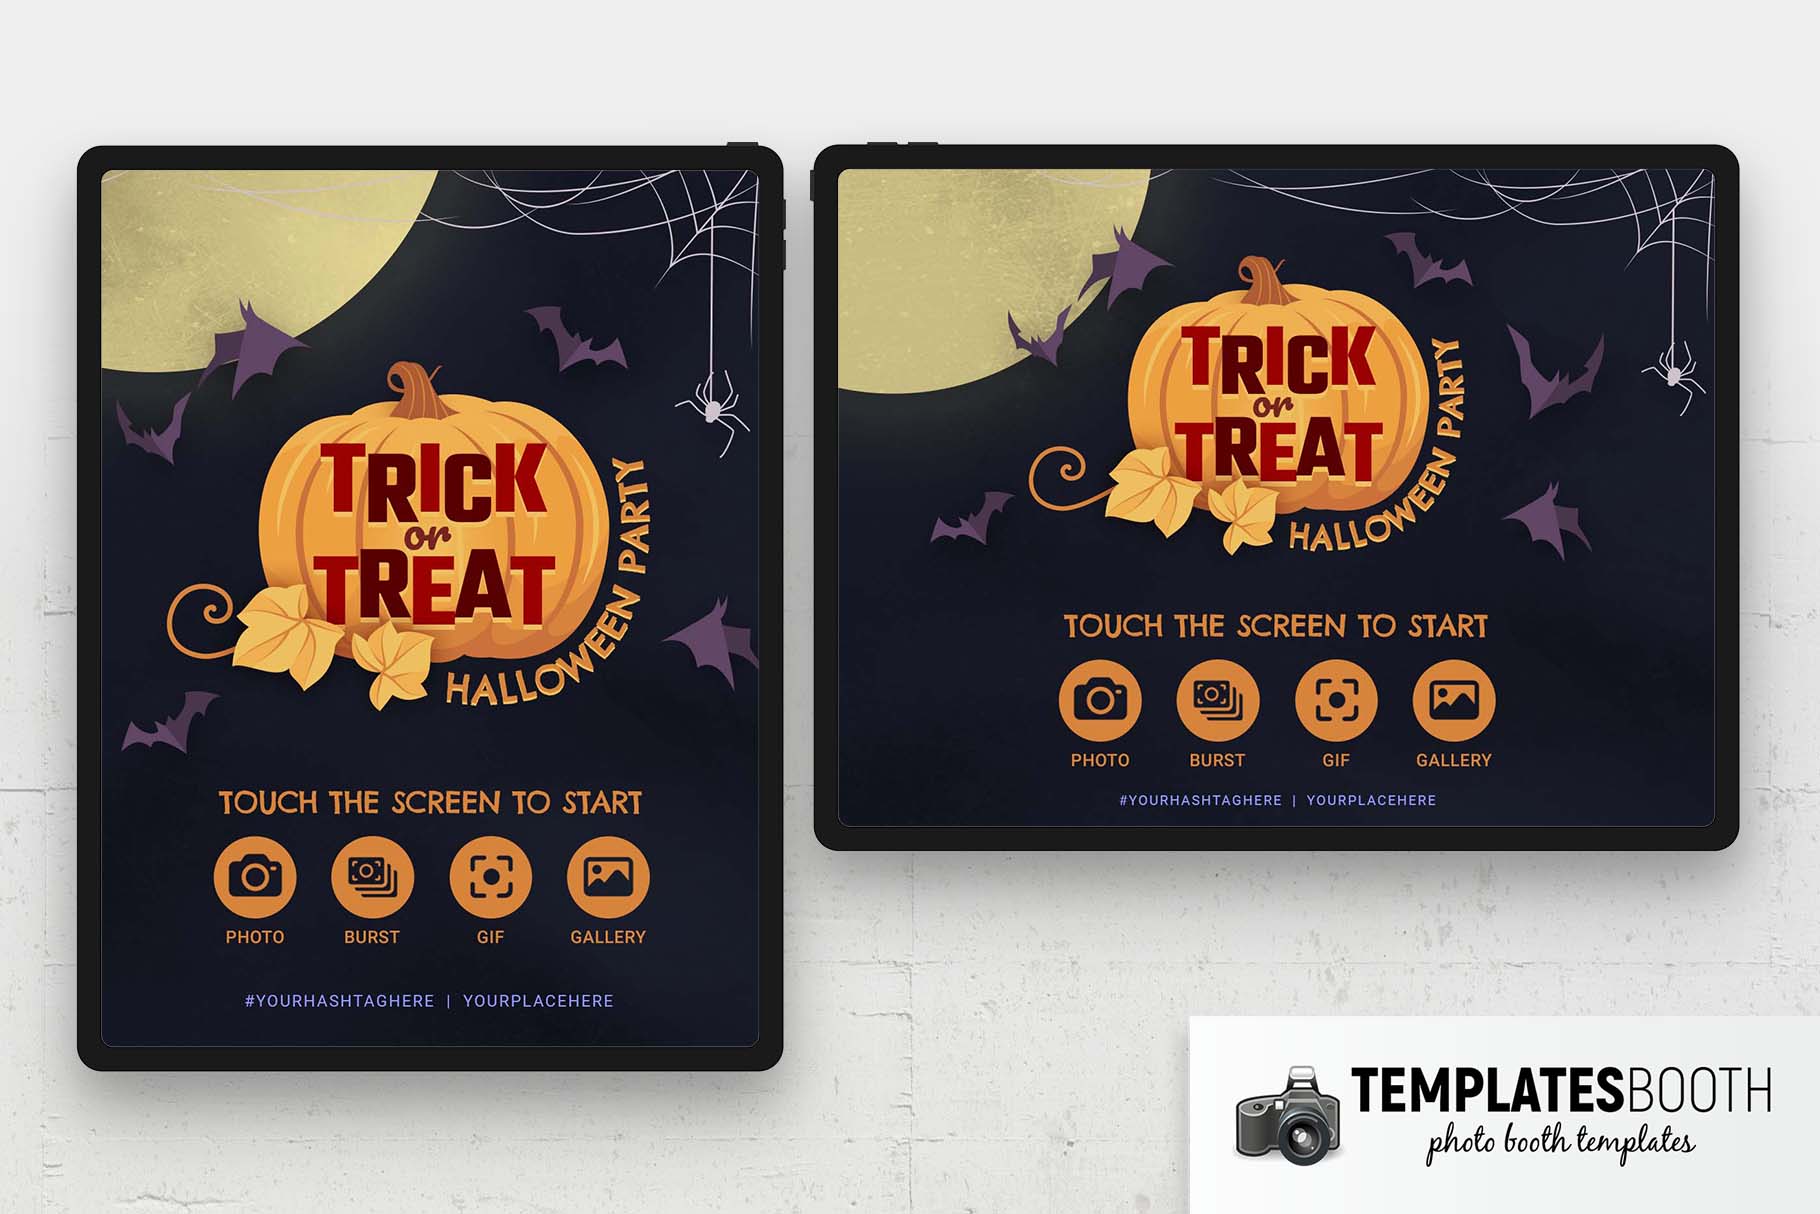 Trick or Treat Photo Booth Welcome Screen